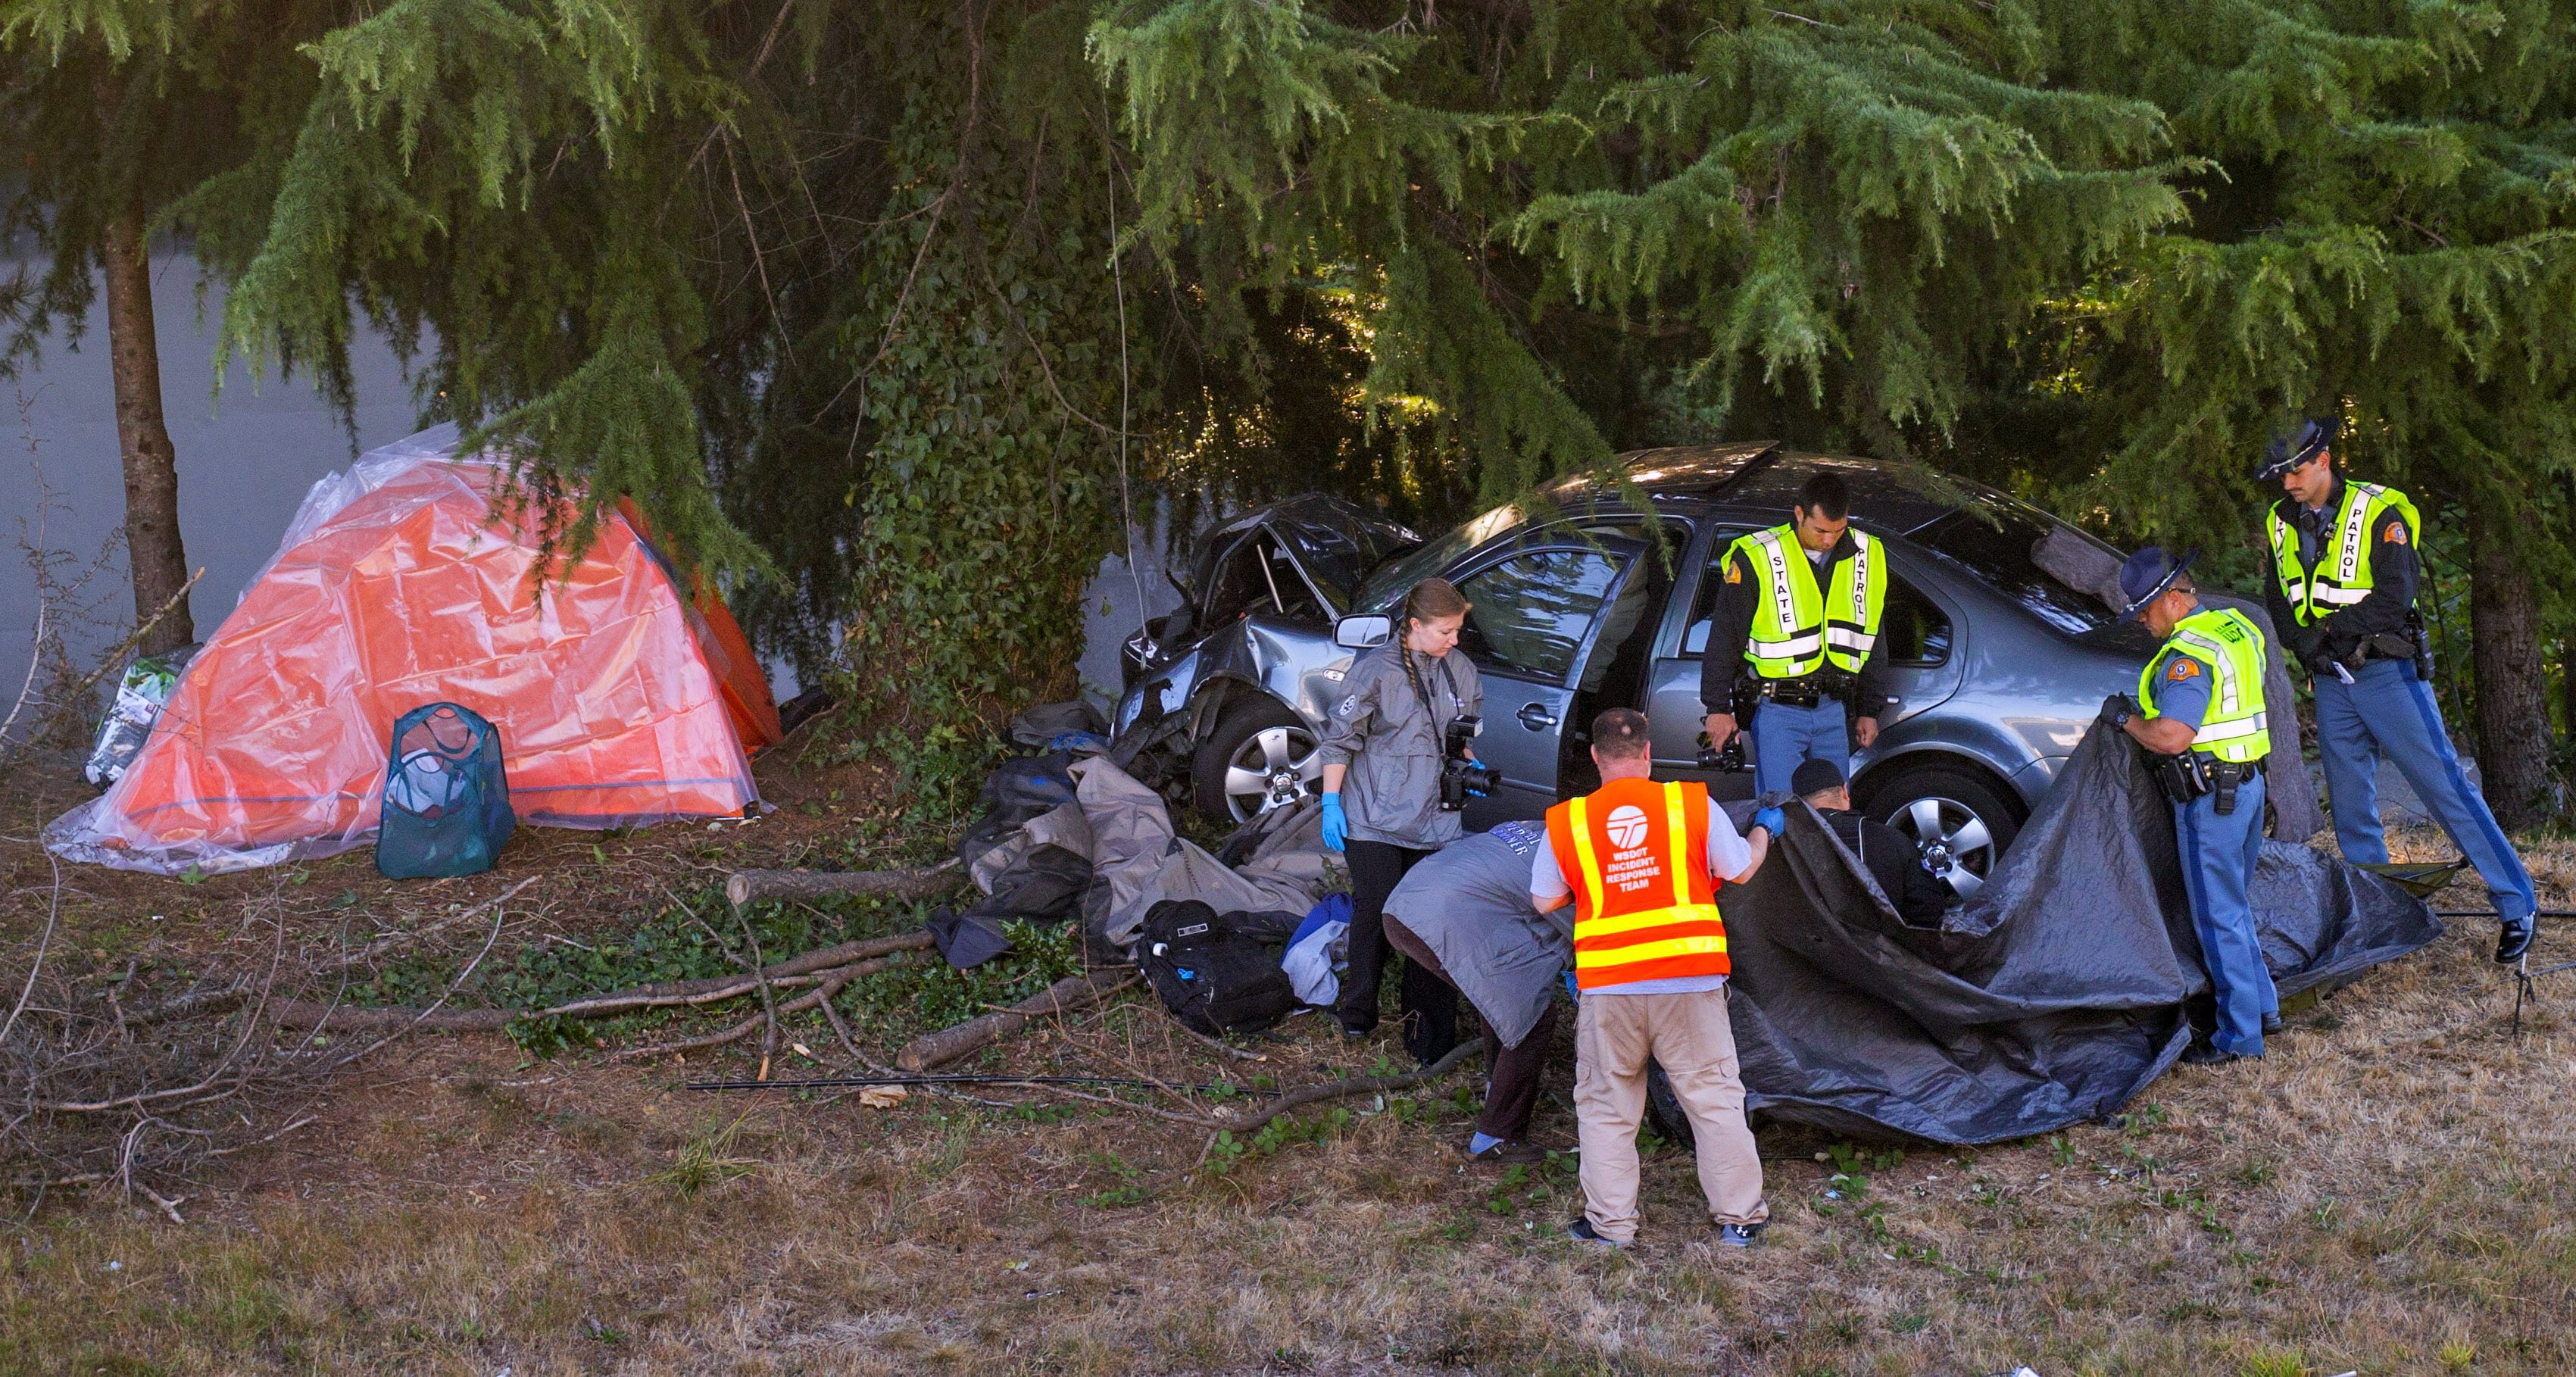 One person was killed when a car crashed into a tent near the Northeast 50th Street off-ramp near Seattles University District on Monday, Sept. 12, 2016. The driver was taken into custody and is under investigation of vehicular homicide, police said.